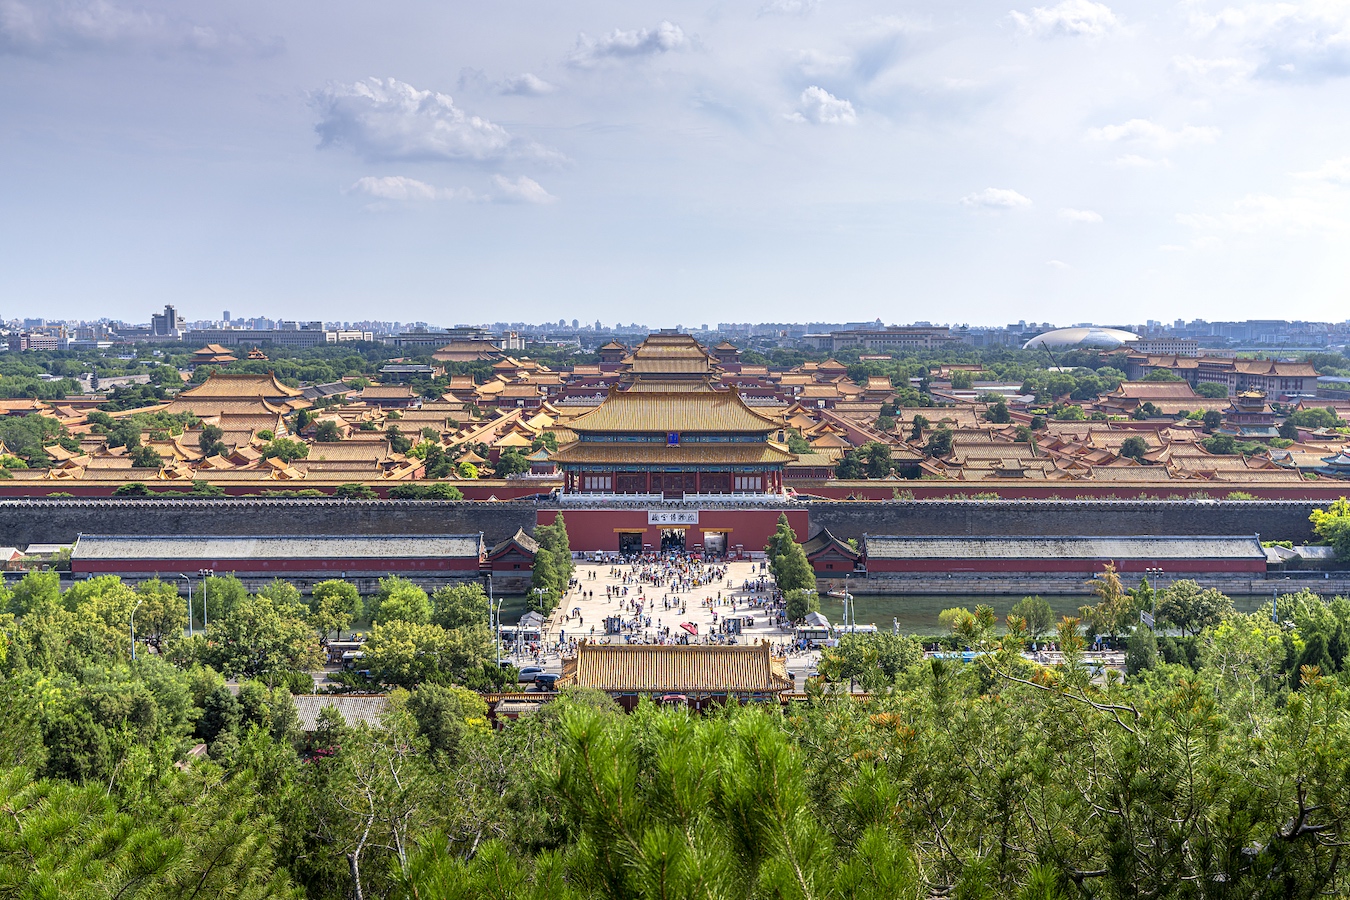 The Palace Museum, also known as the Forbidden City, situated along the Beijing Central Axis. /CFP